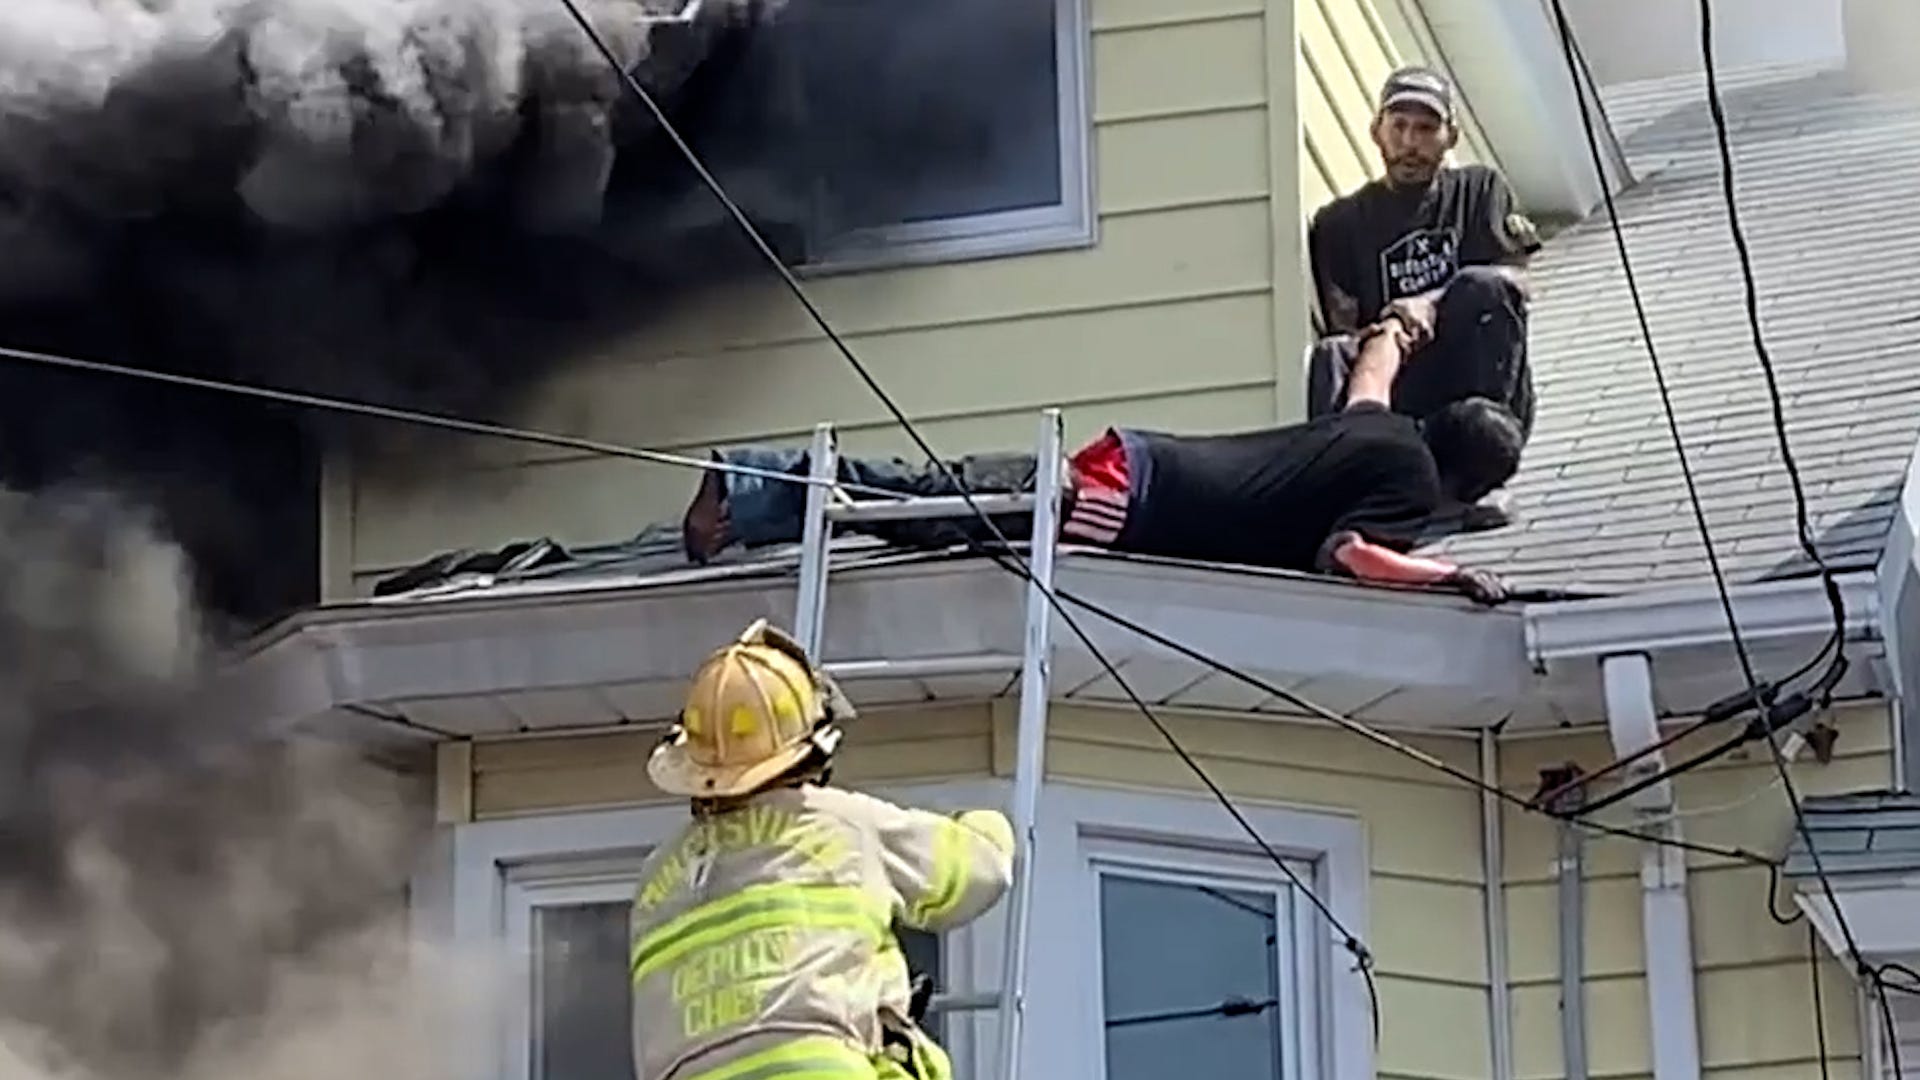 neighbor risks life to save man, woman from house fire in pennsylvania: watch heroic act